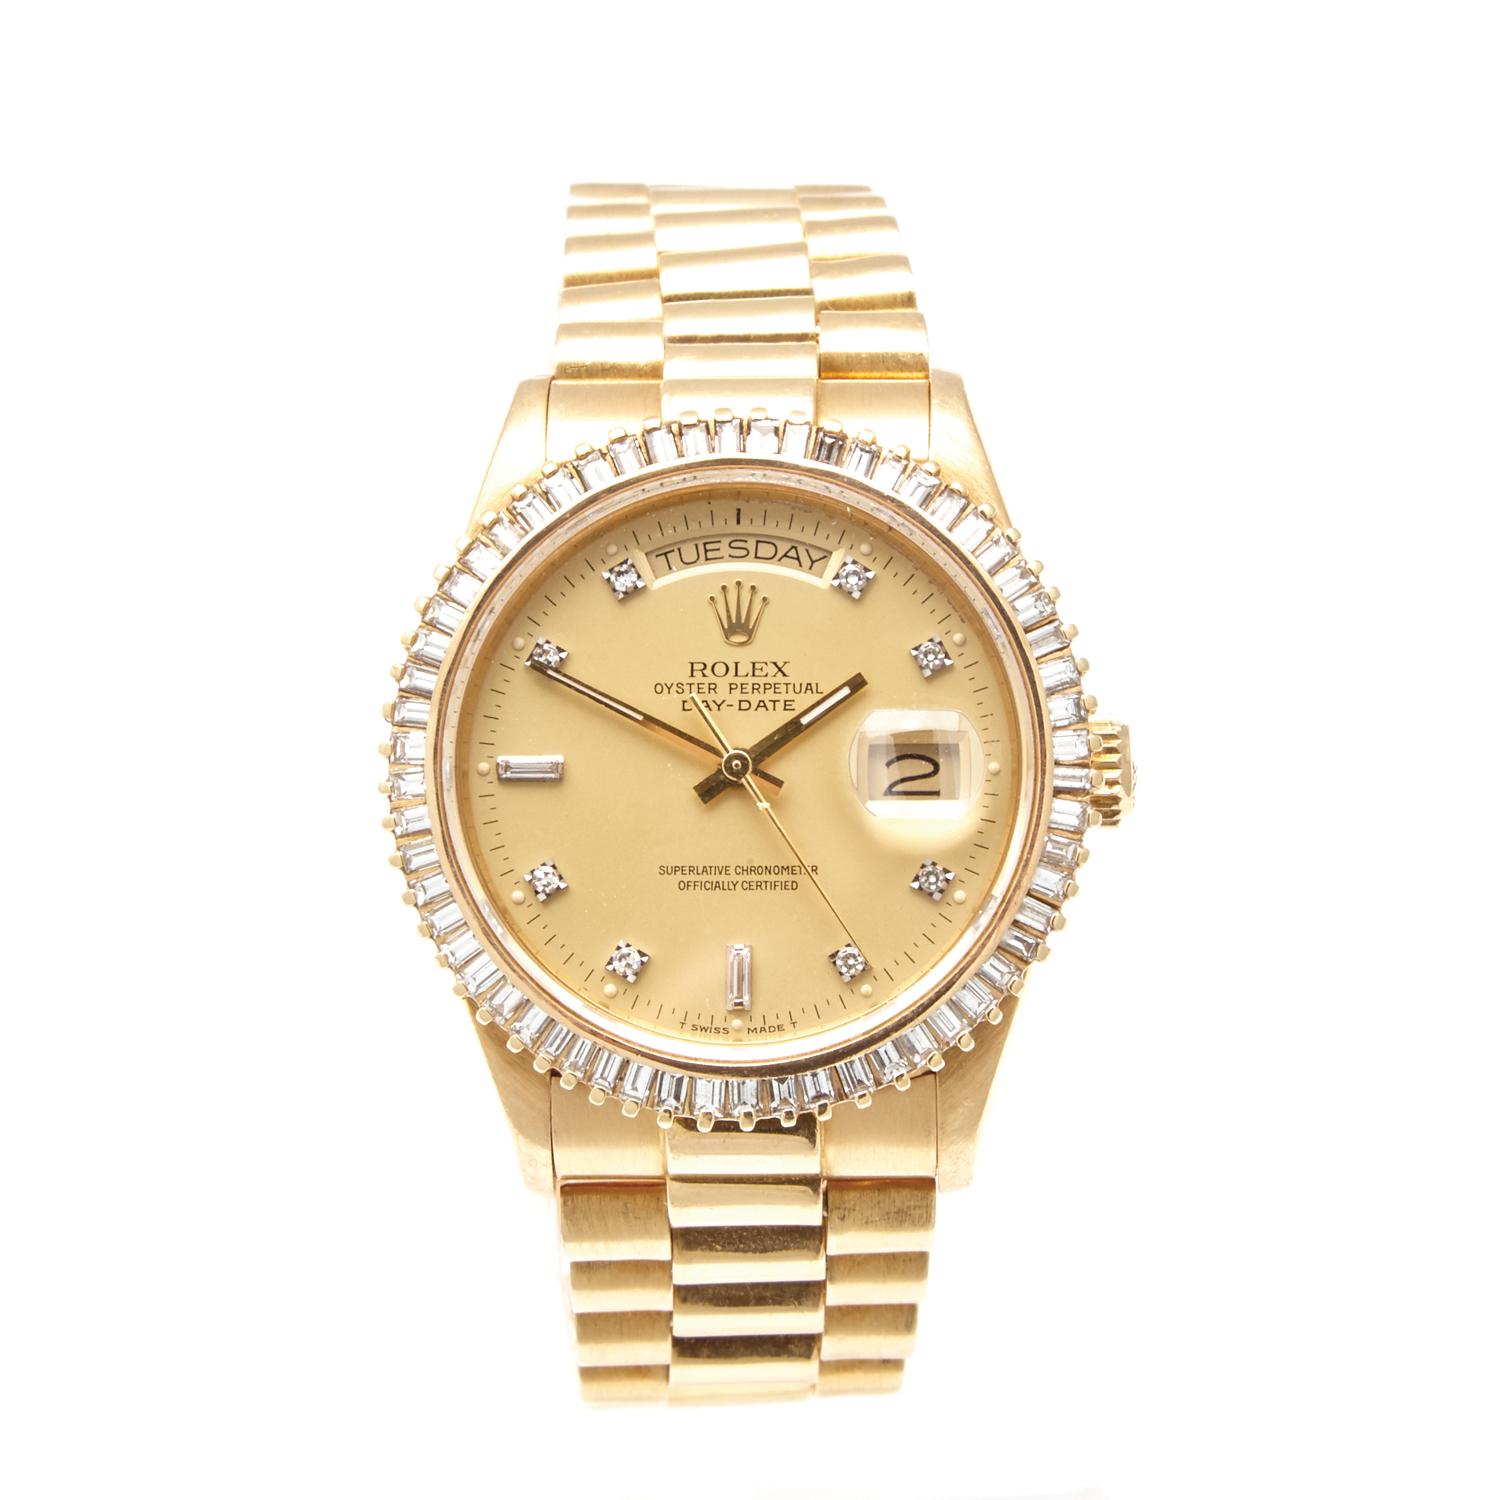 A Gold and Diamond Rolex Oyster 